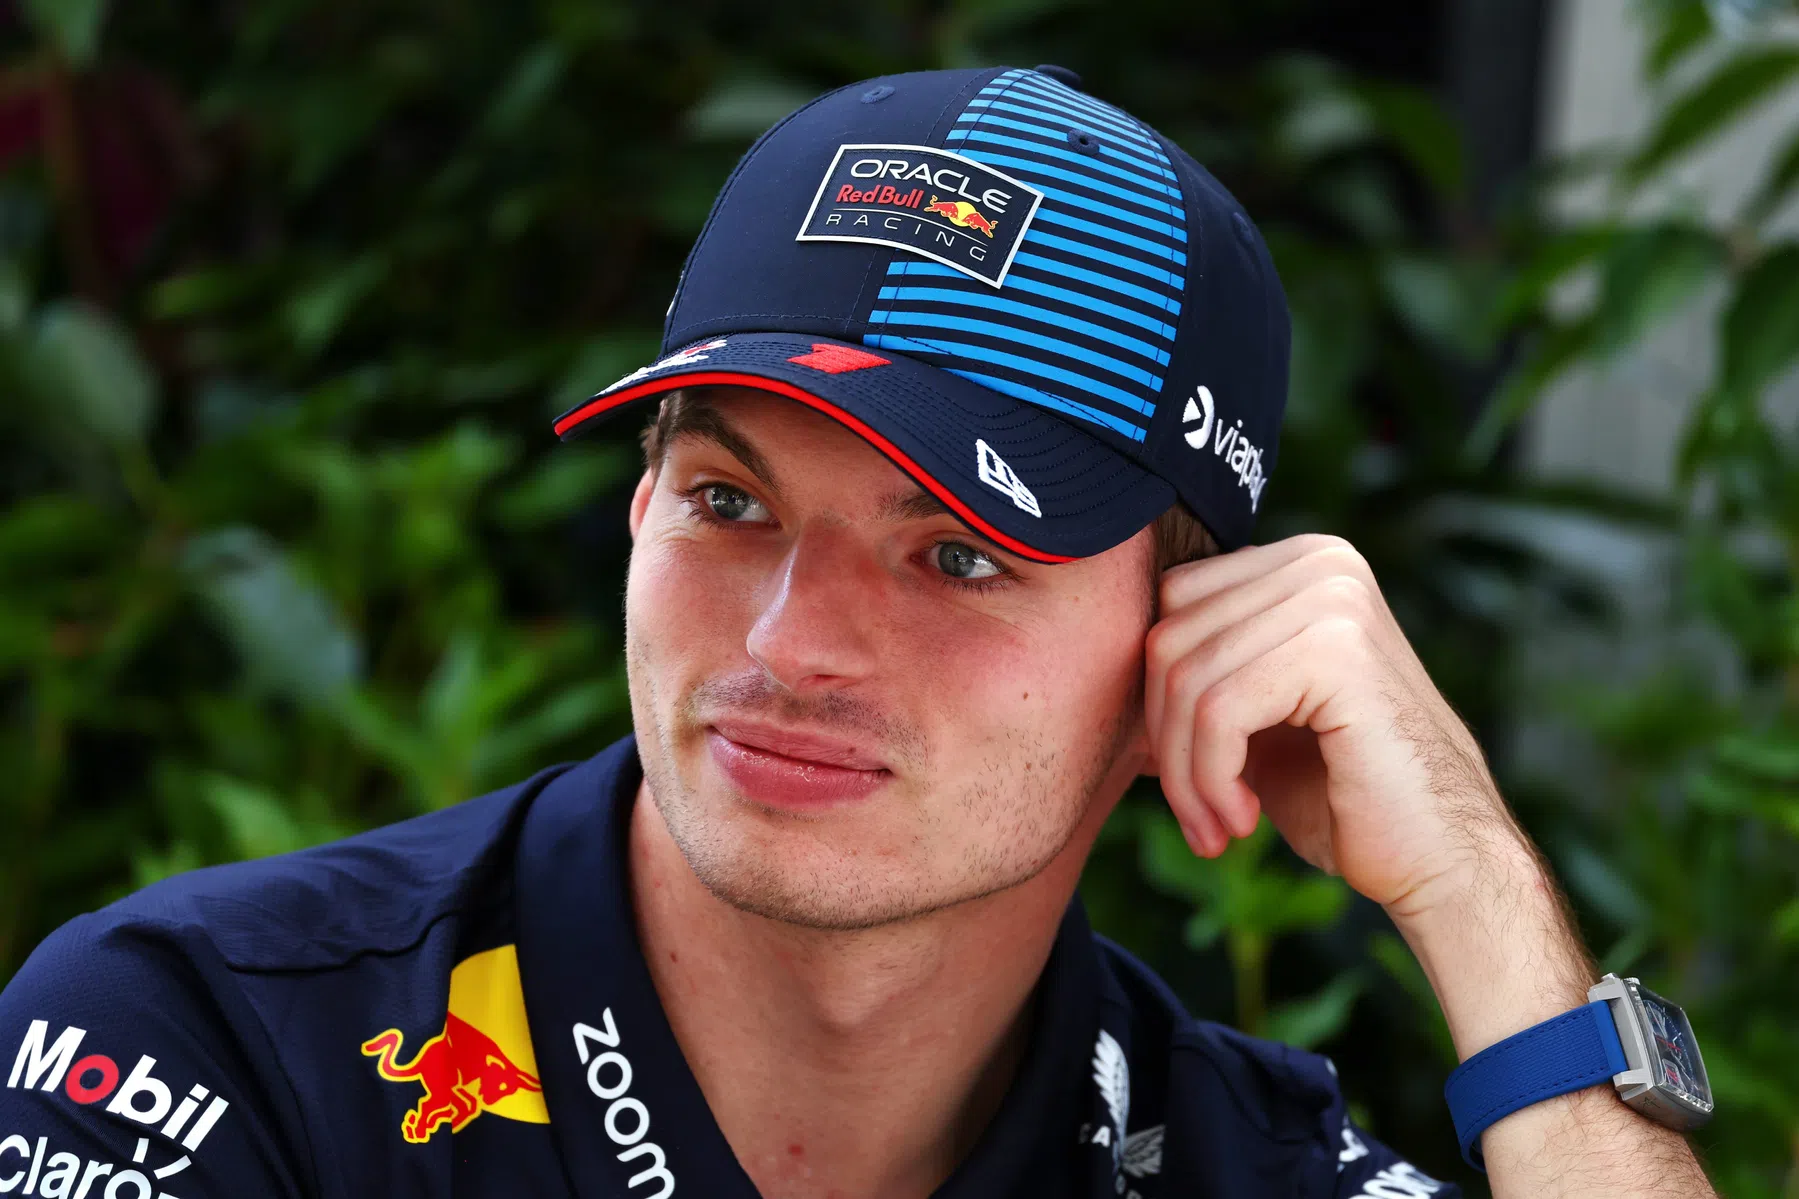 verstappen on whether to stay at red bull